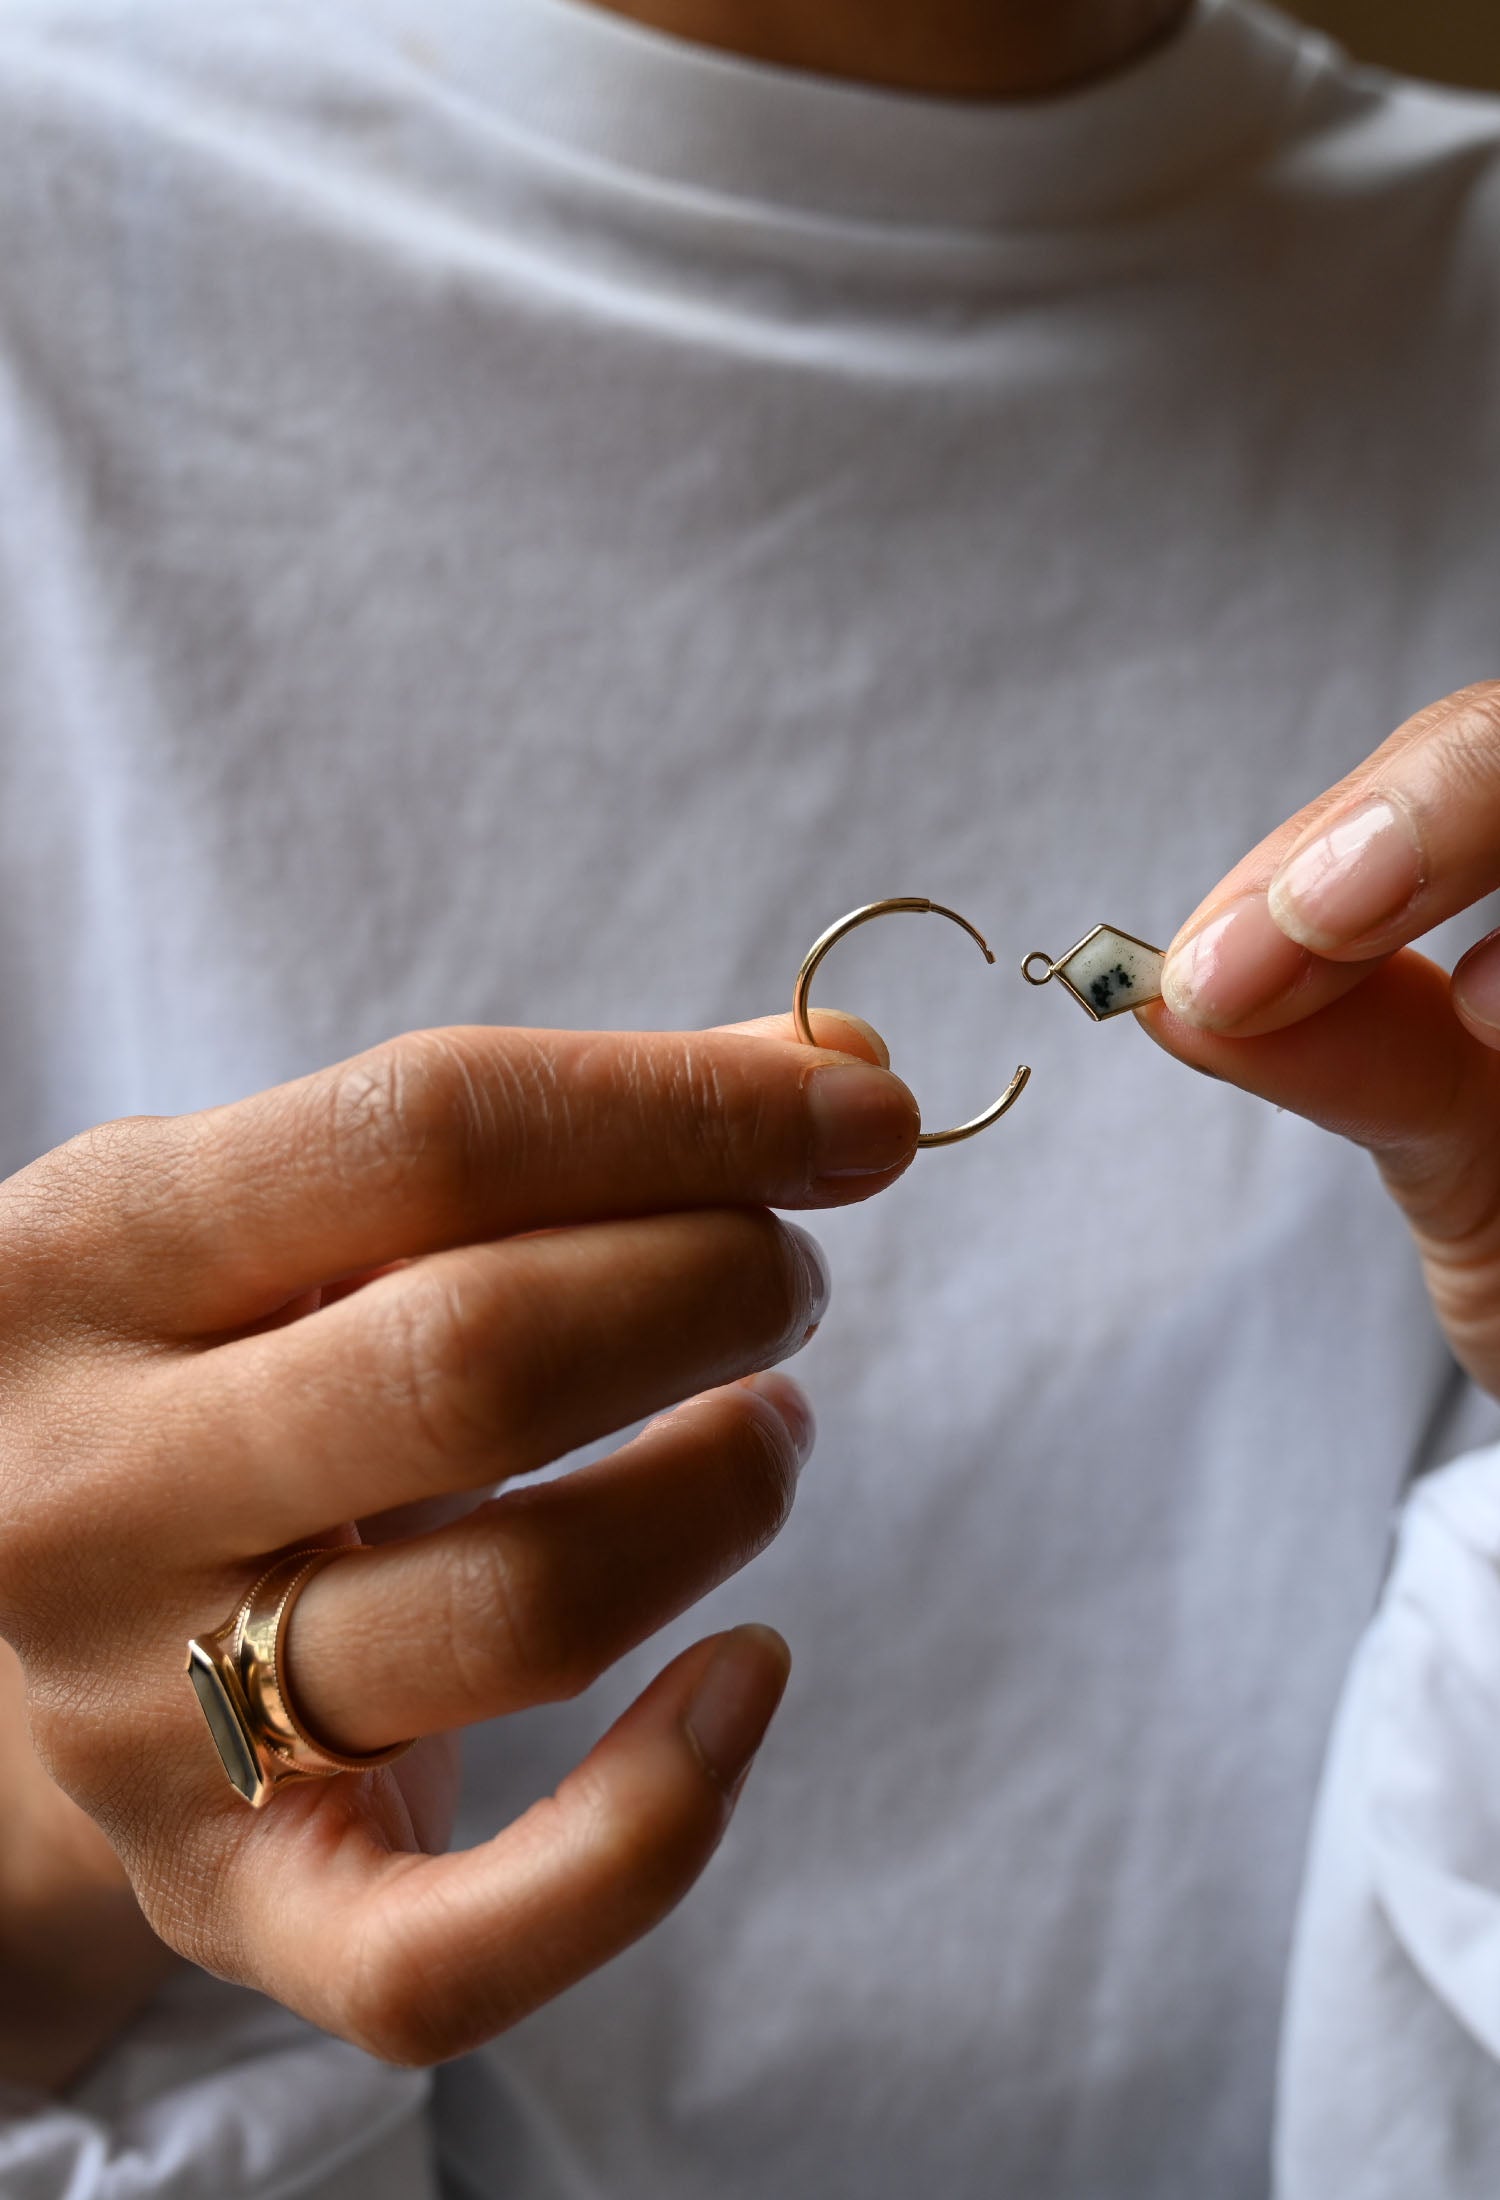 Model adding a plaque to create your own hoop earrings by Metier